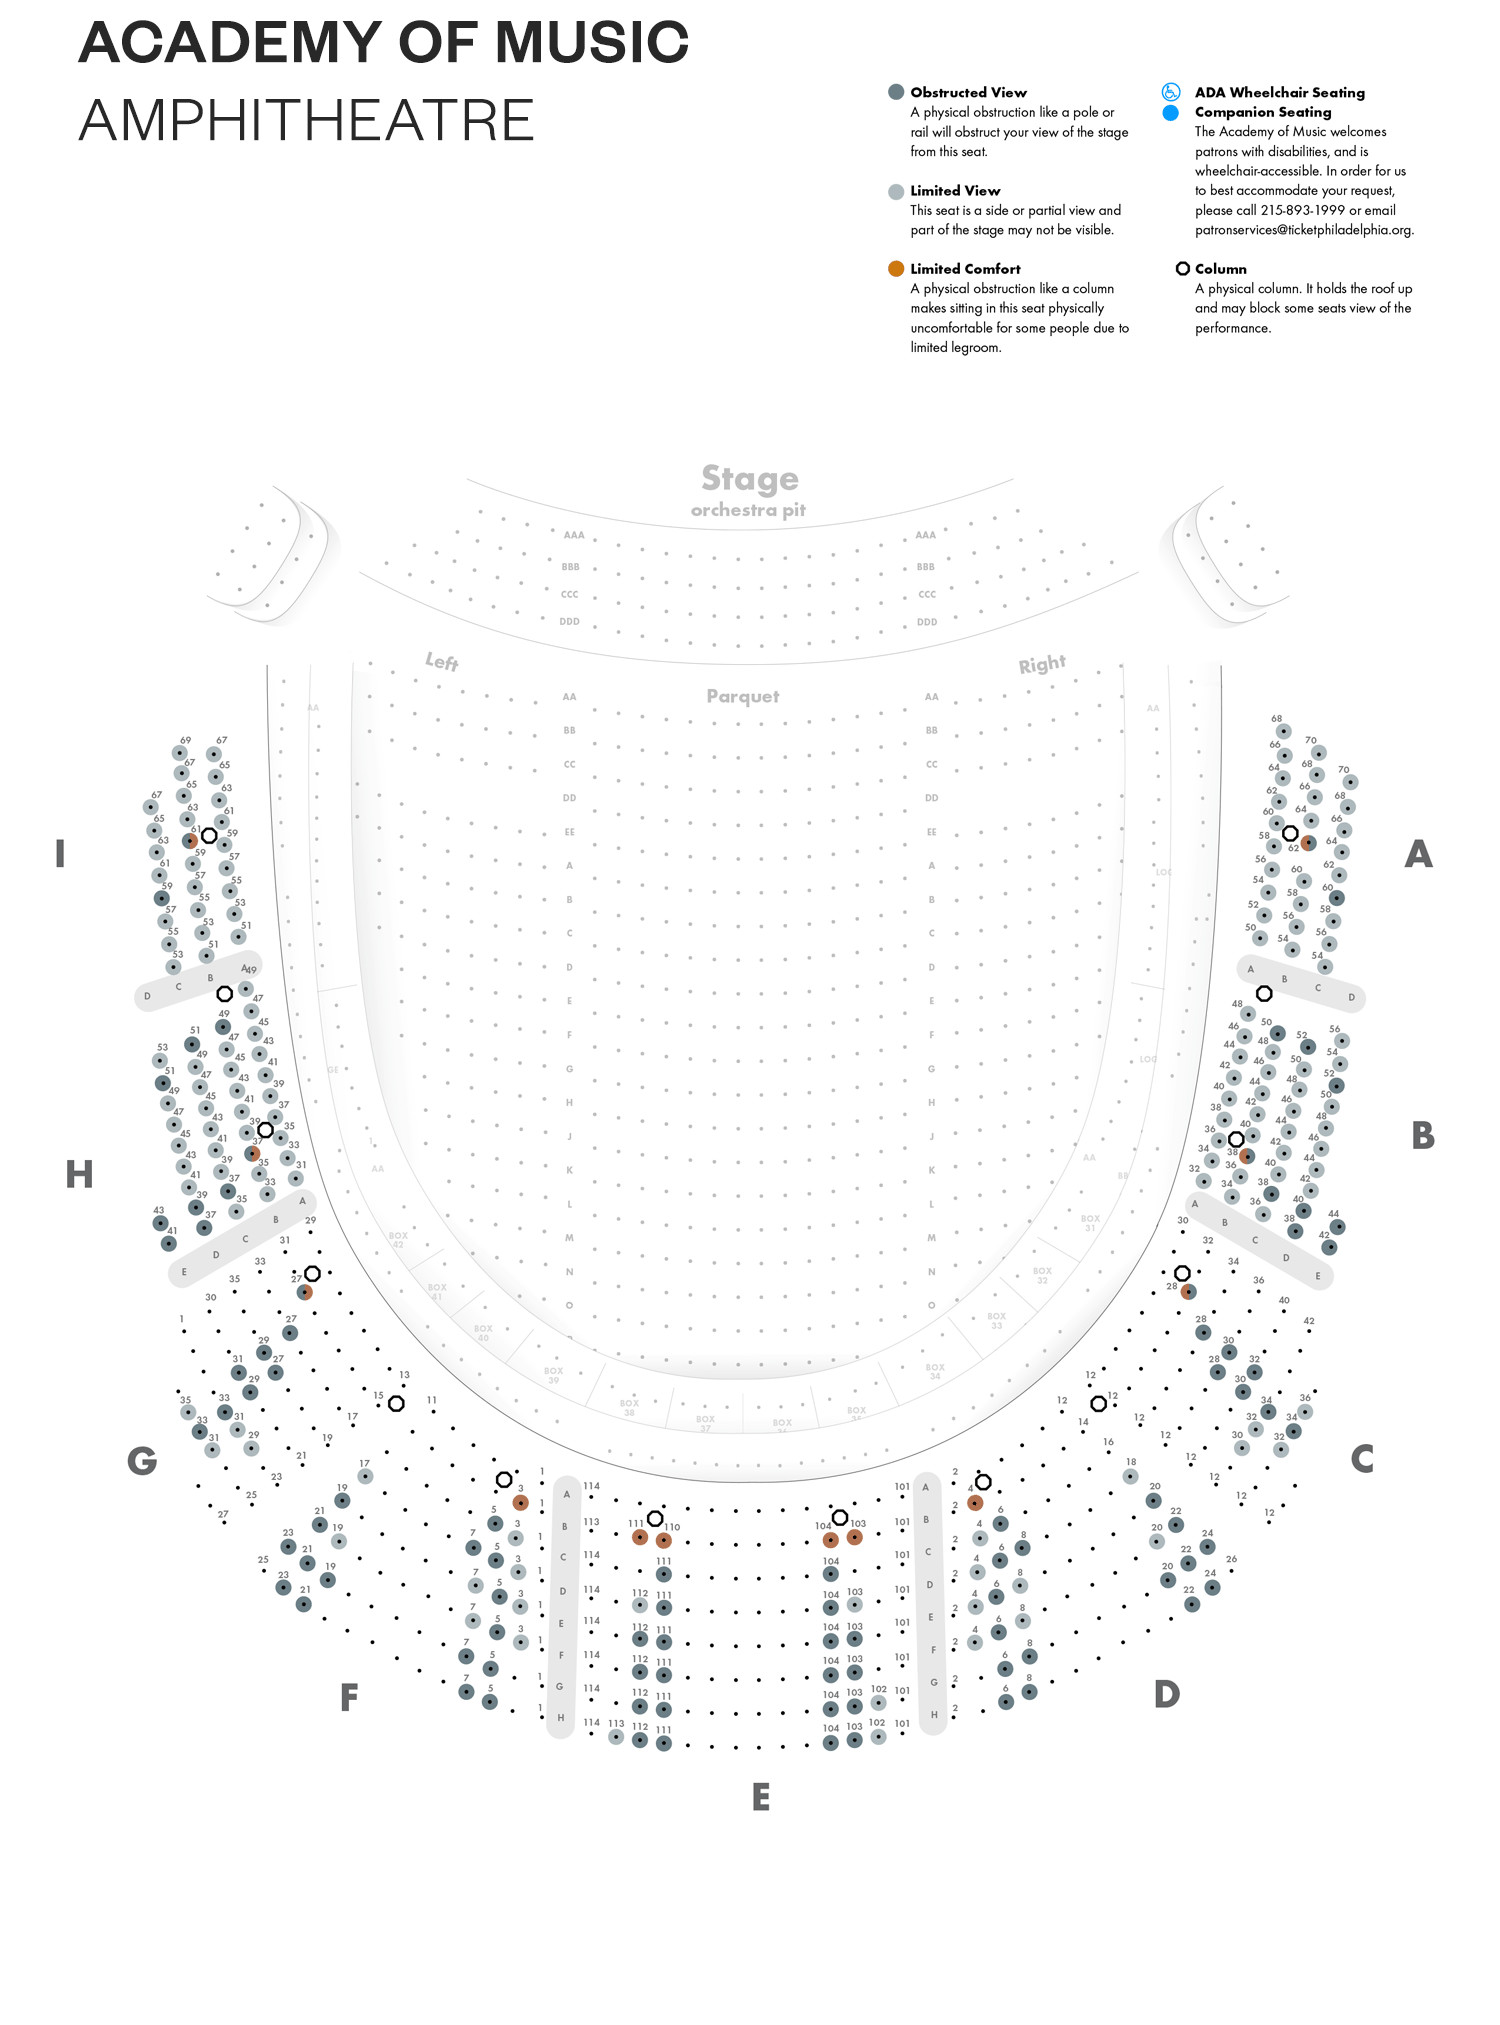 Academy of Music - Amphitheater - Seating Chart